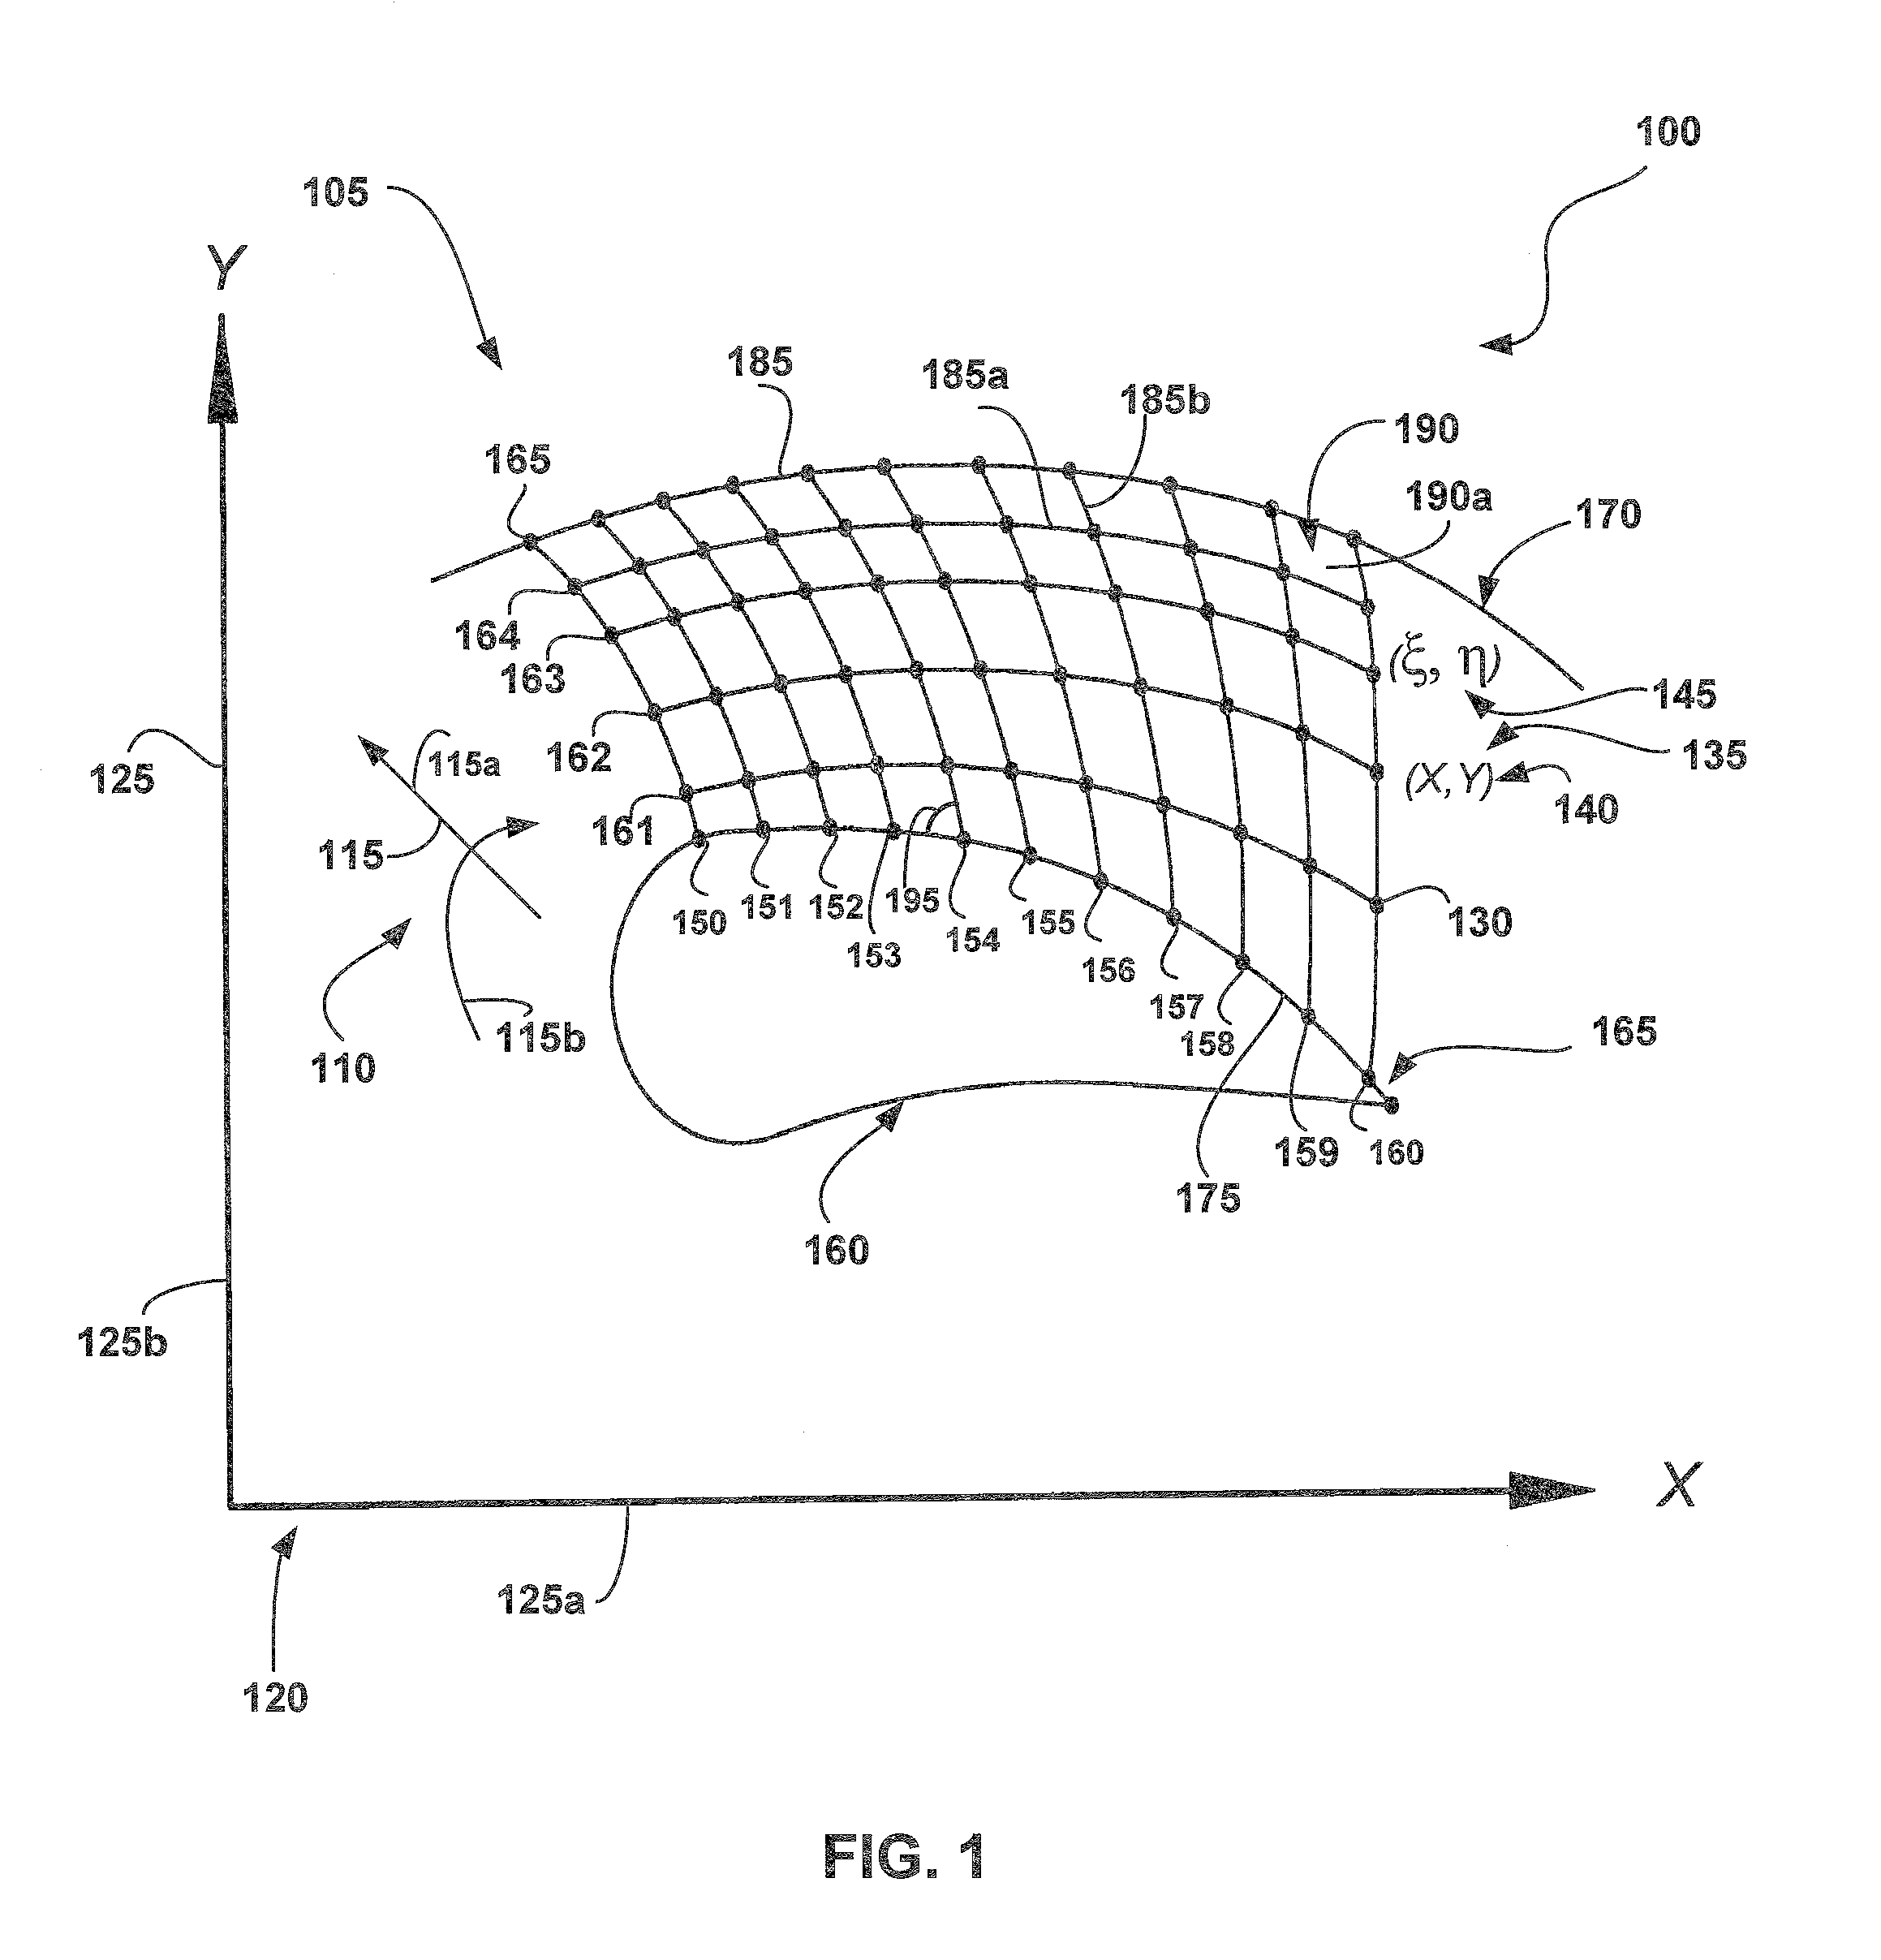 Source Decay Parameter System and Method for Automatic Grid Generation